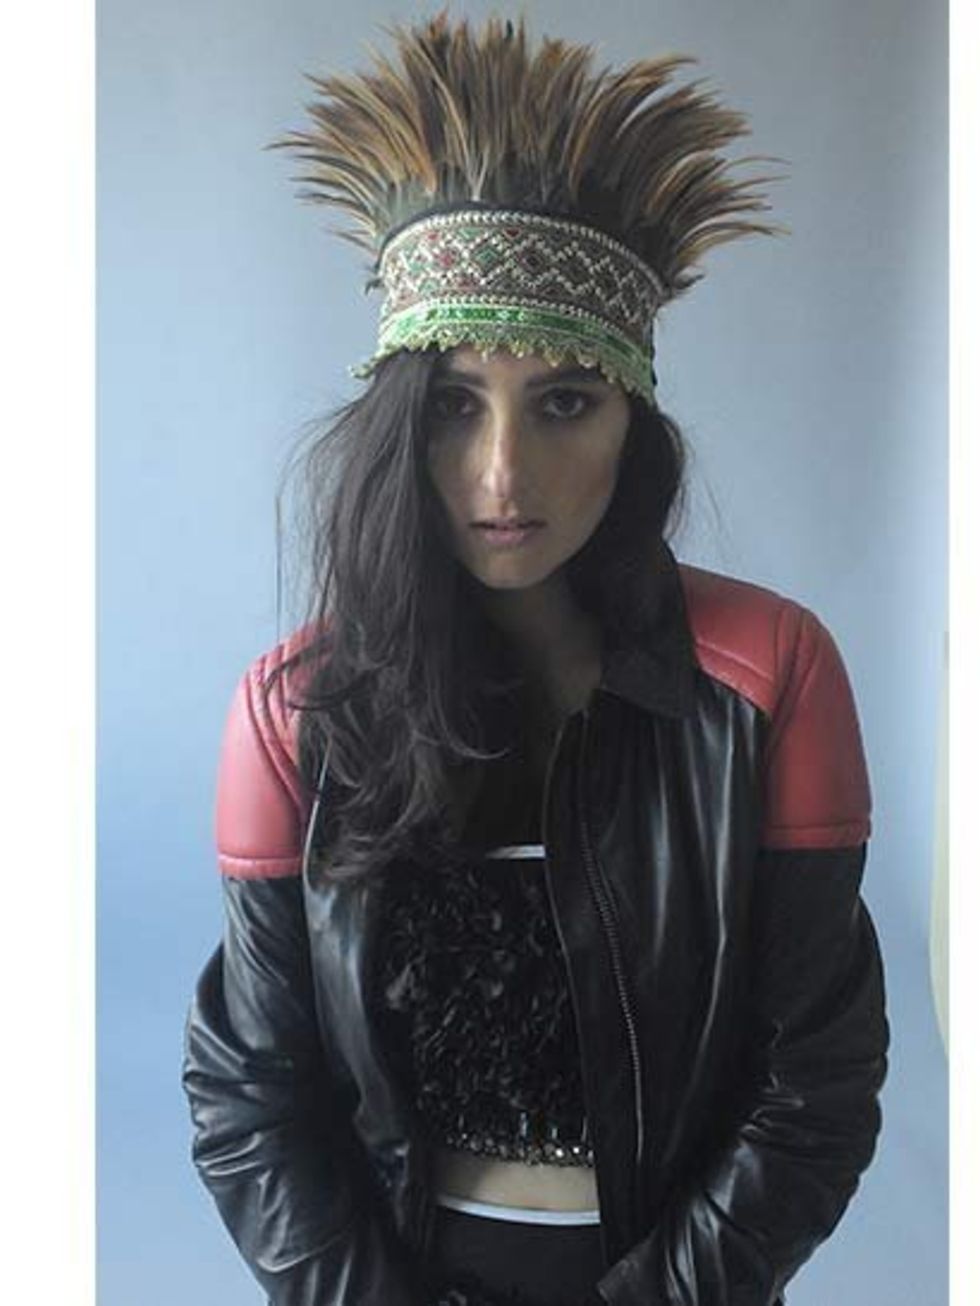 <p>Banks wearing <a href="http://www.marni.com/home.asp?tskay=B84CE7A2">Marni</a> and a leather jacket by <a href="http://www.ganni.com/home/">Ganni</a>. </p>